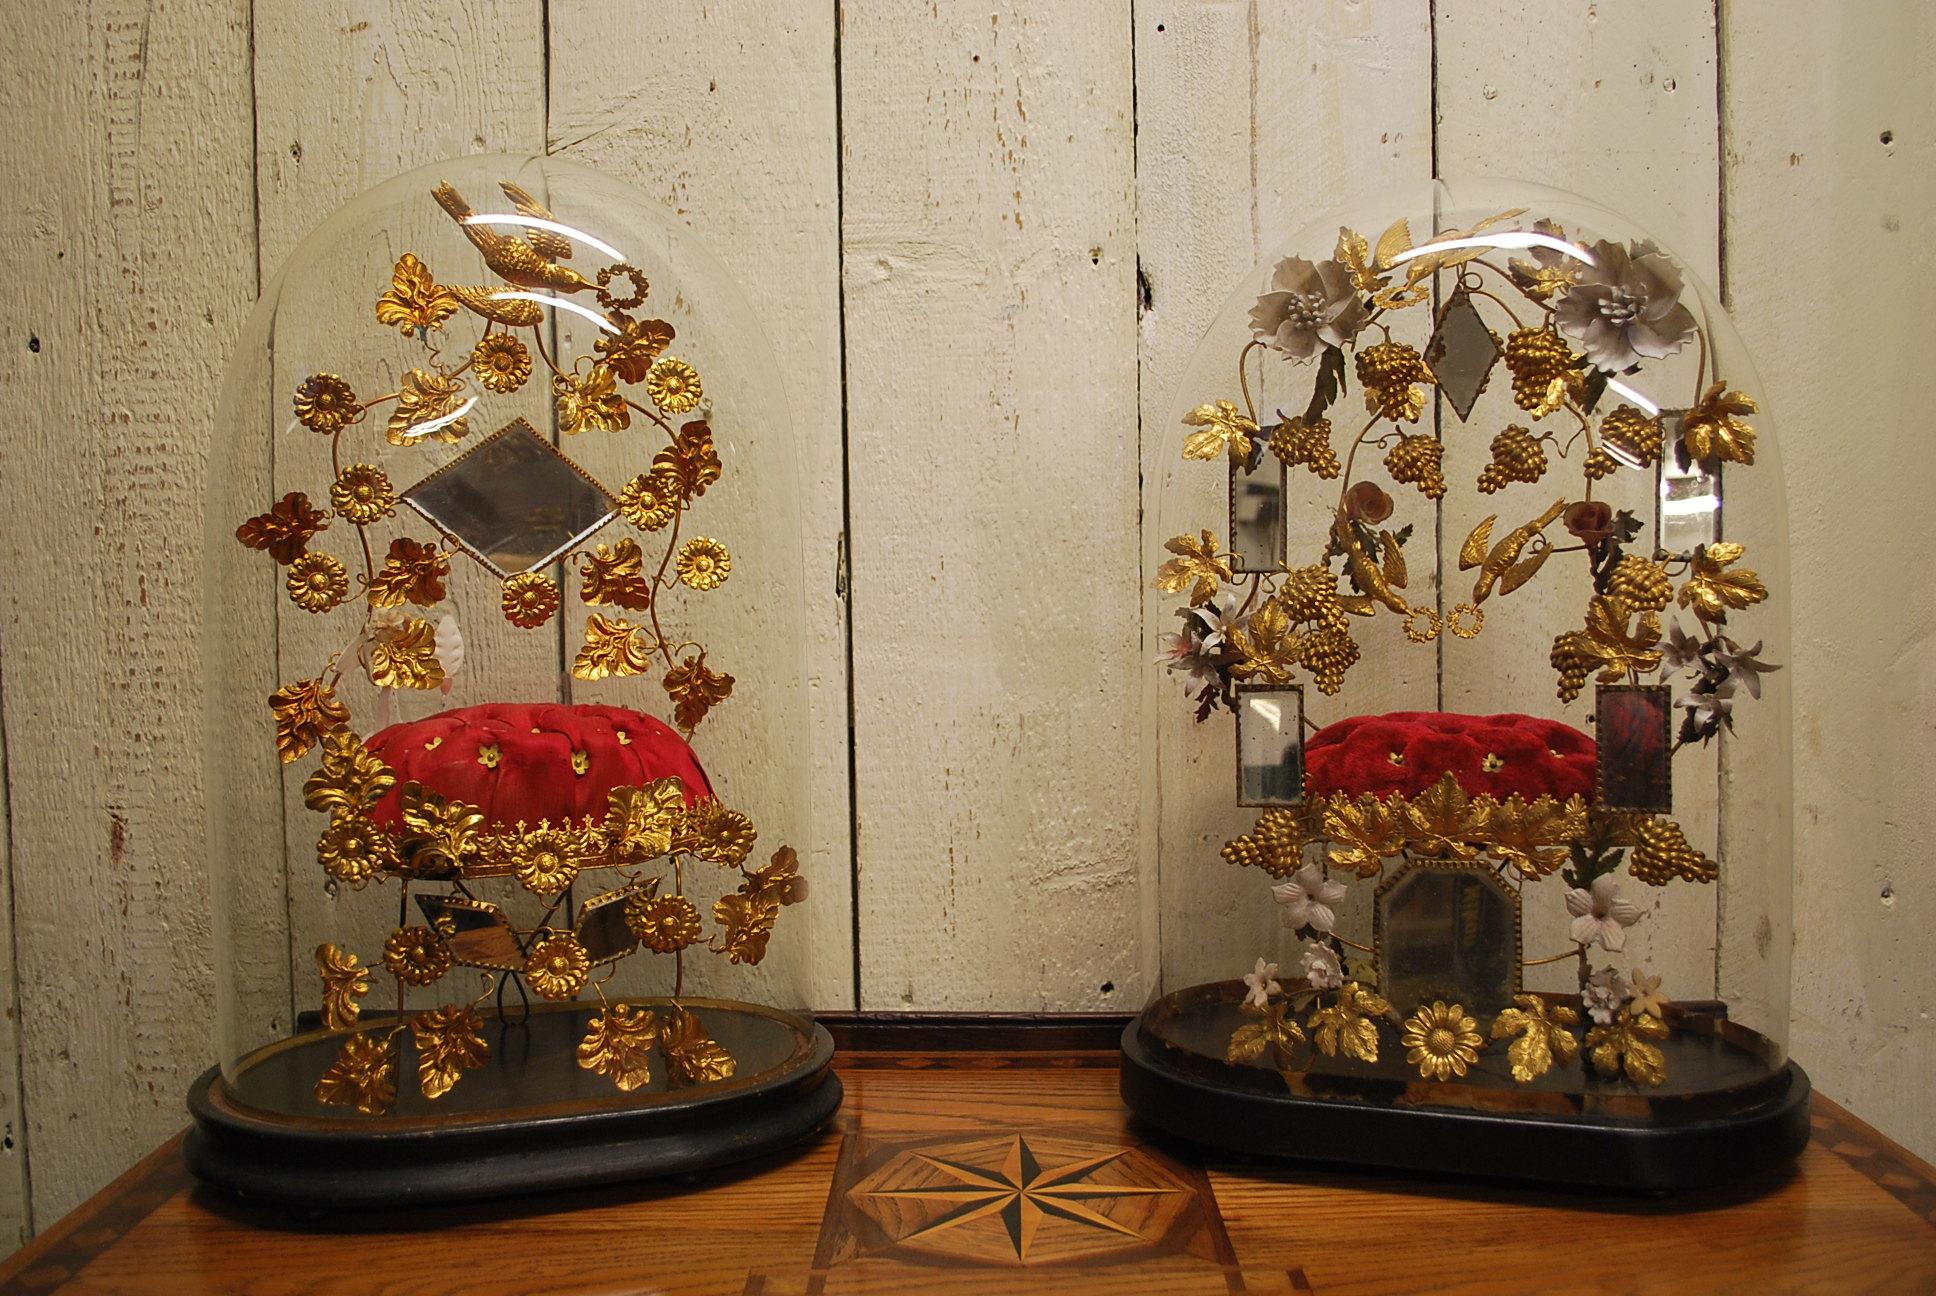 Hutton-Clarke Antiques is delighted to present an exquisite pair of French wedding displays, elegantly showcased within their original, generously sized glass domes. Adorned with intricate gilt foliage, faceted mirrors, and sumptuous deep buttoned